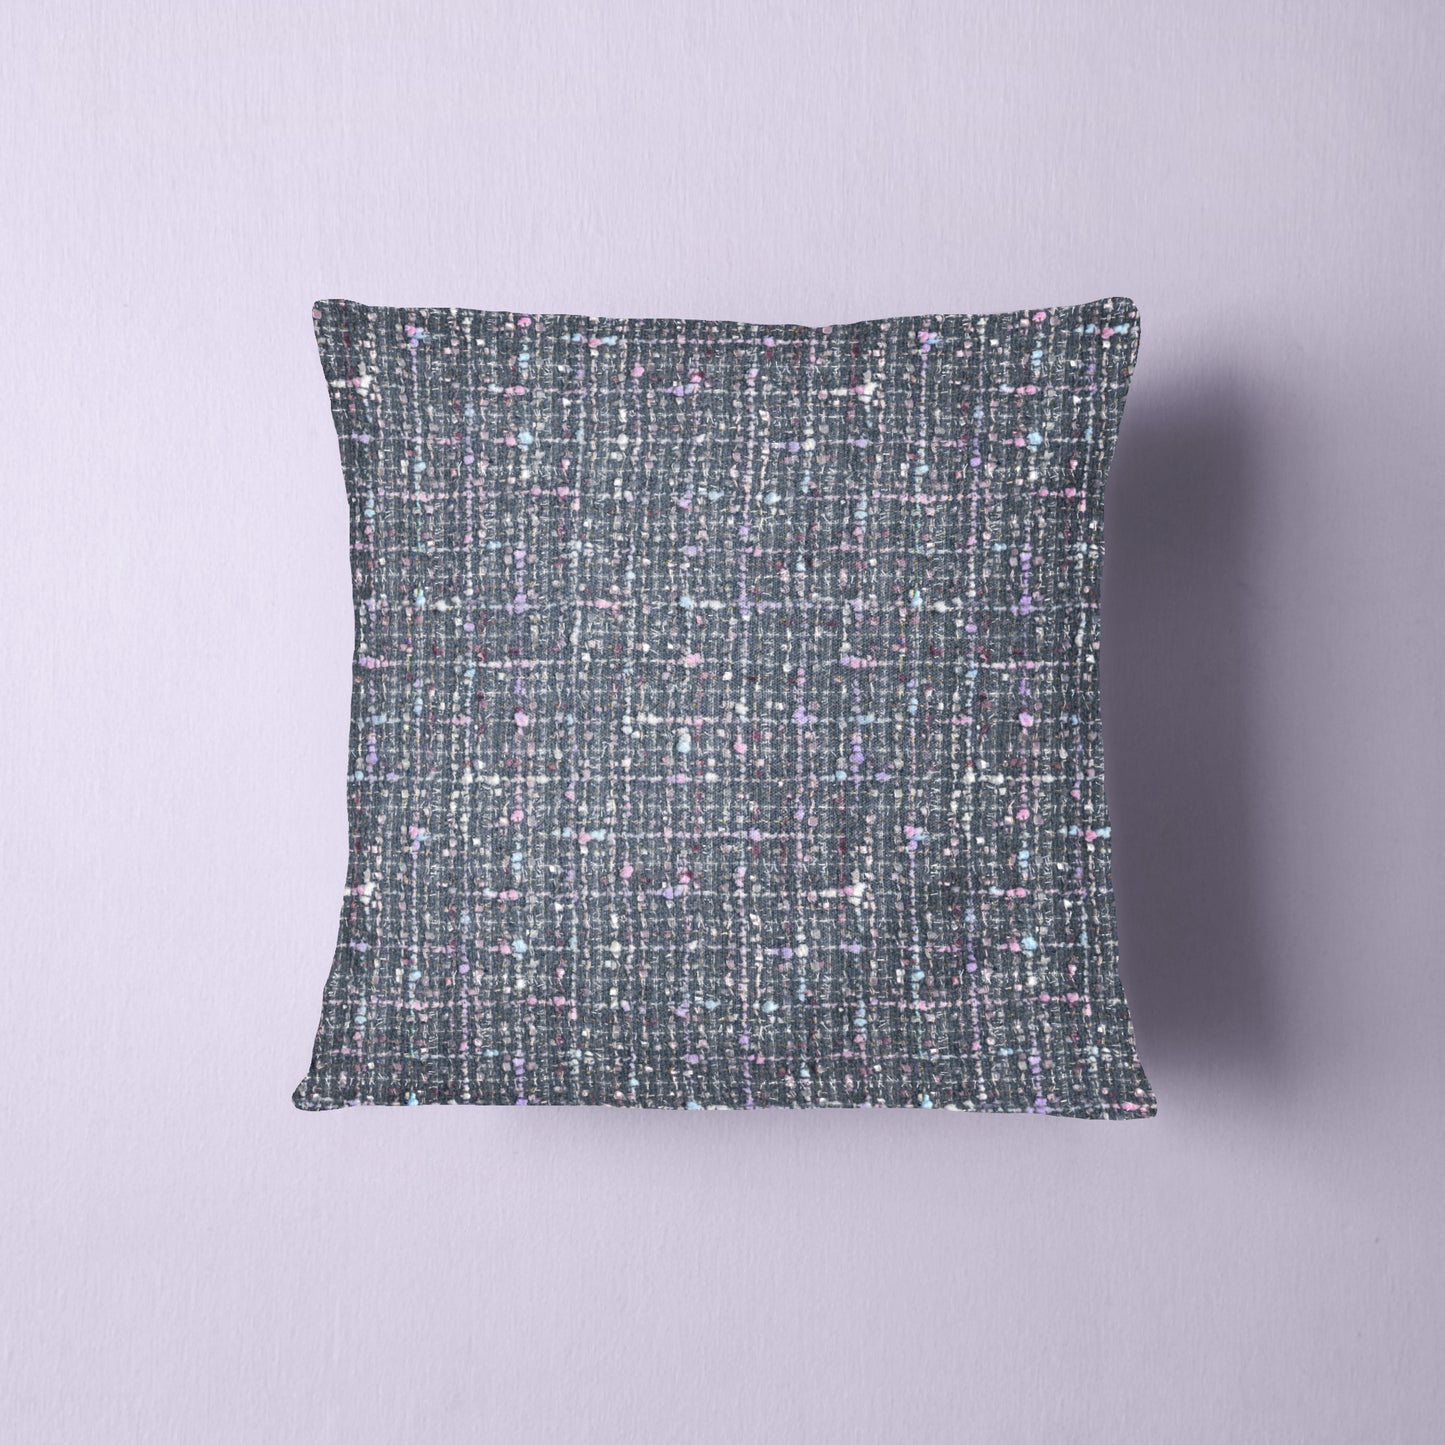 Endless Grey Couture Tweed Pillow Cover